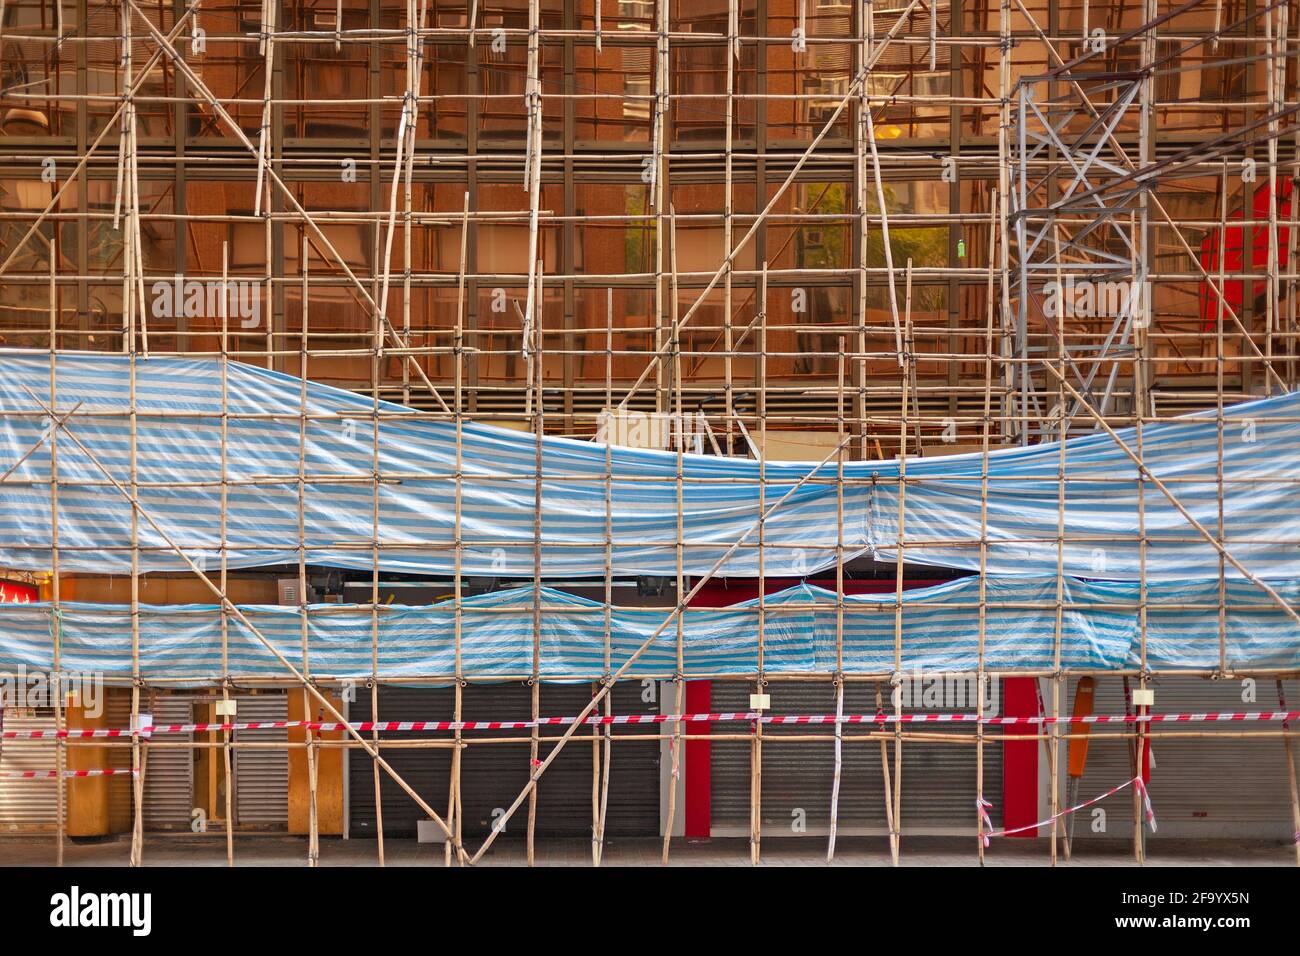 Buiding wrapped in traditional Chinese scaffolding made of bamboo in Hong Kong. Stock Photo